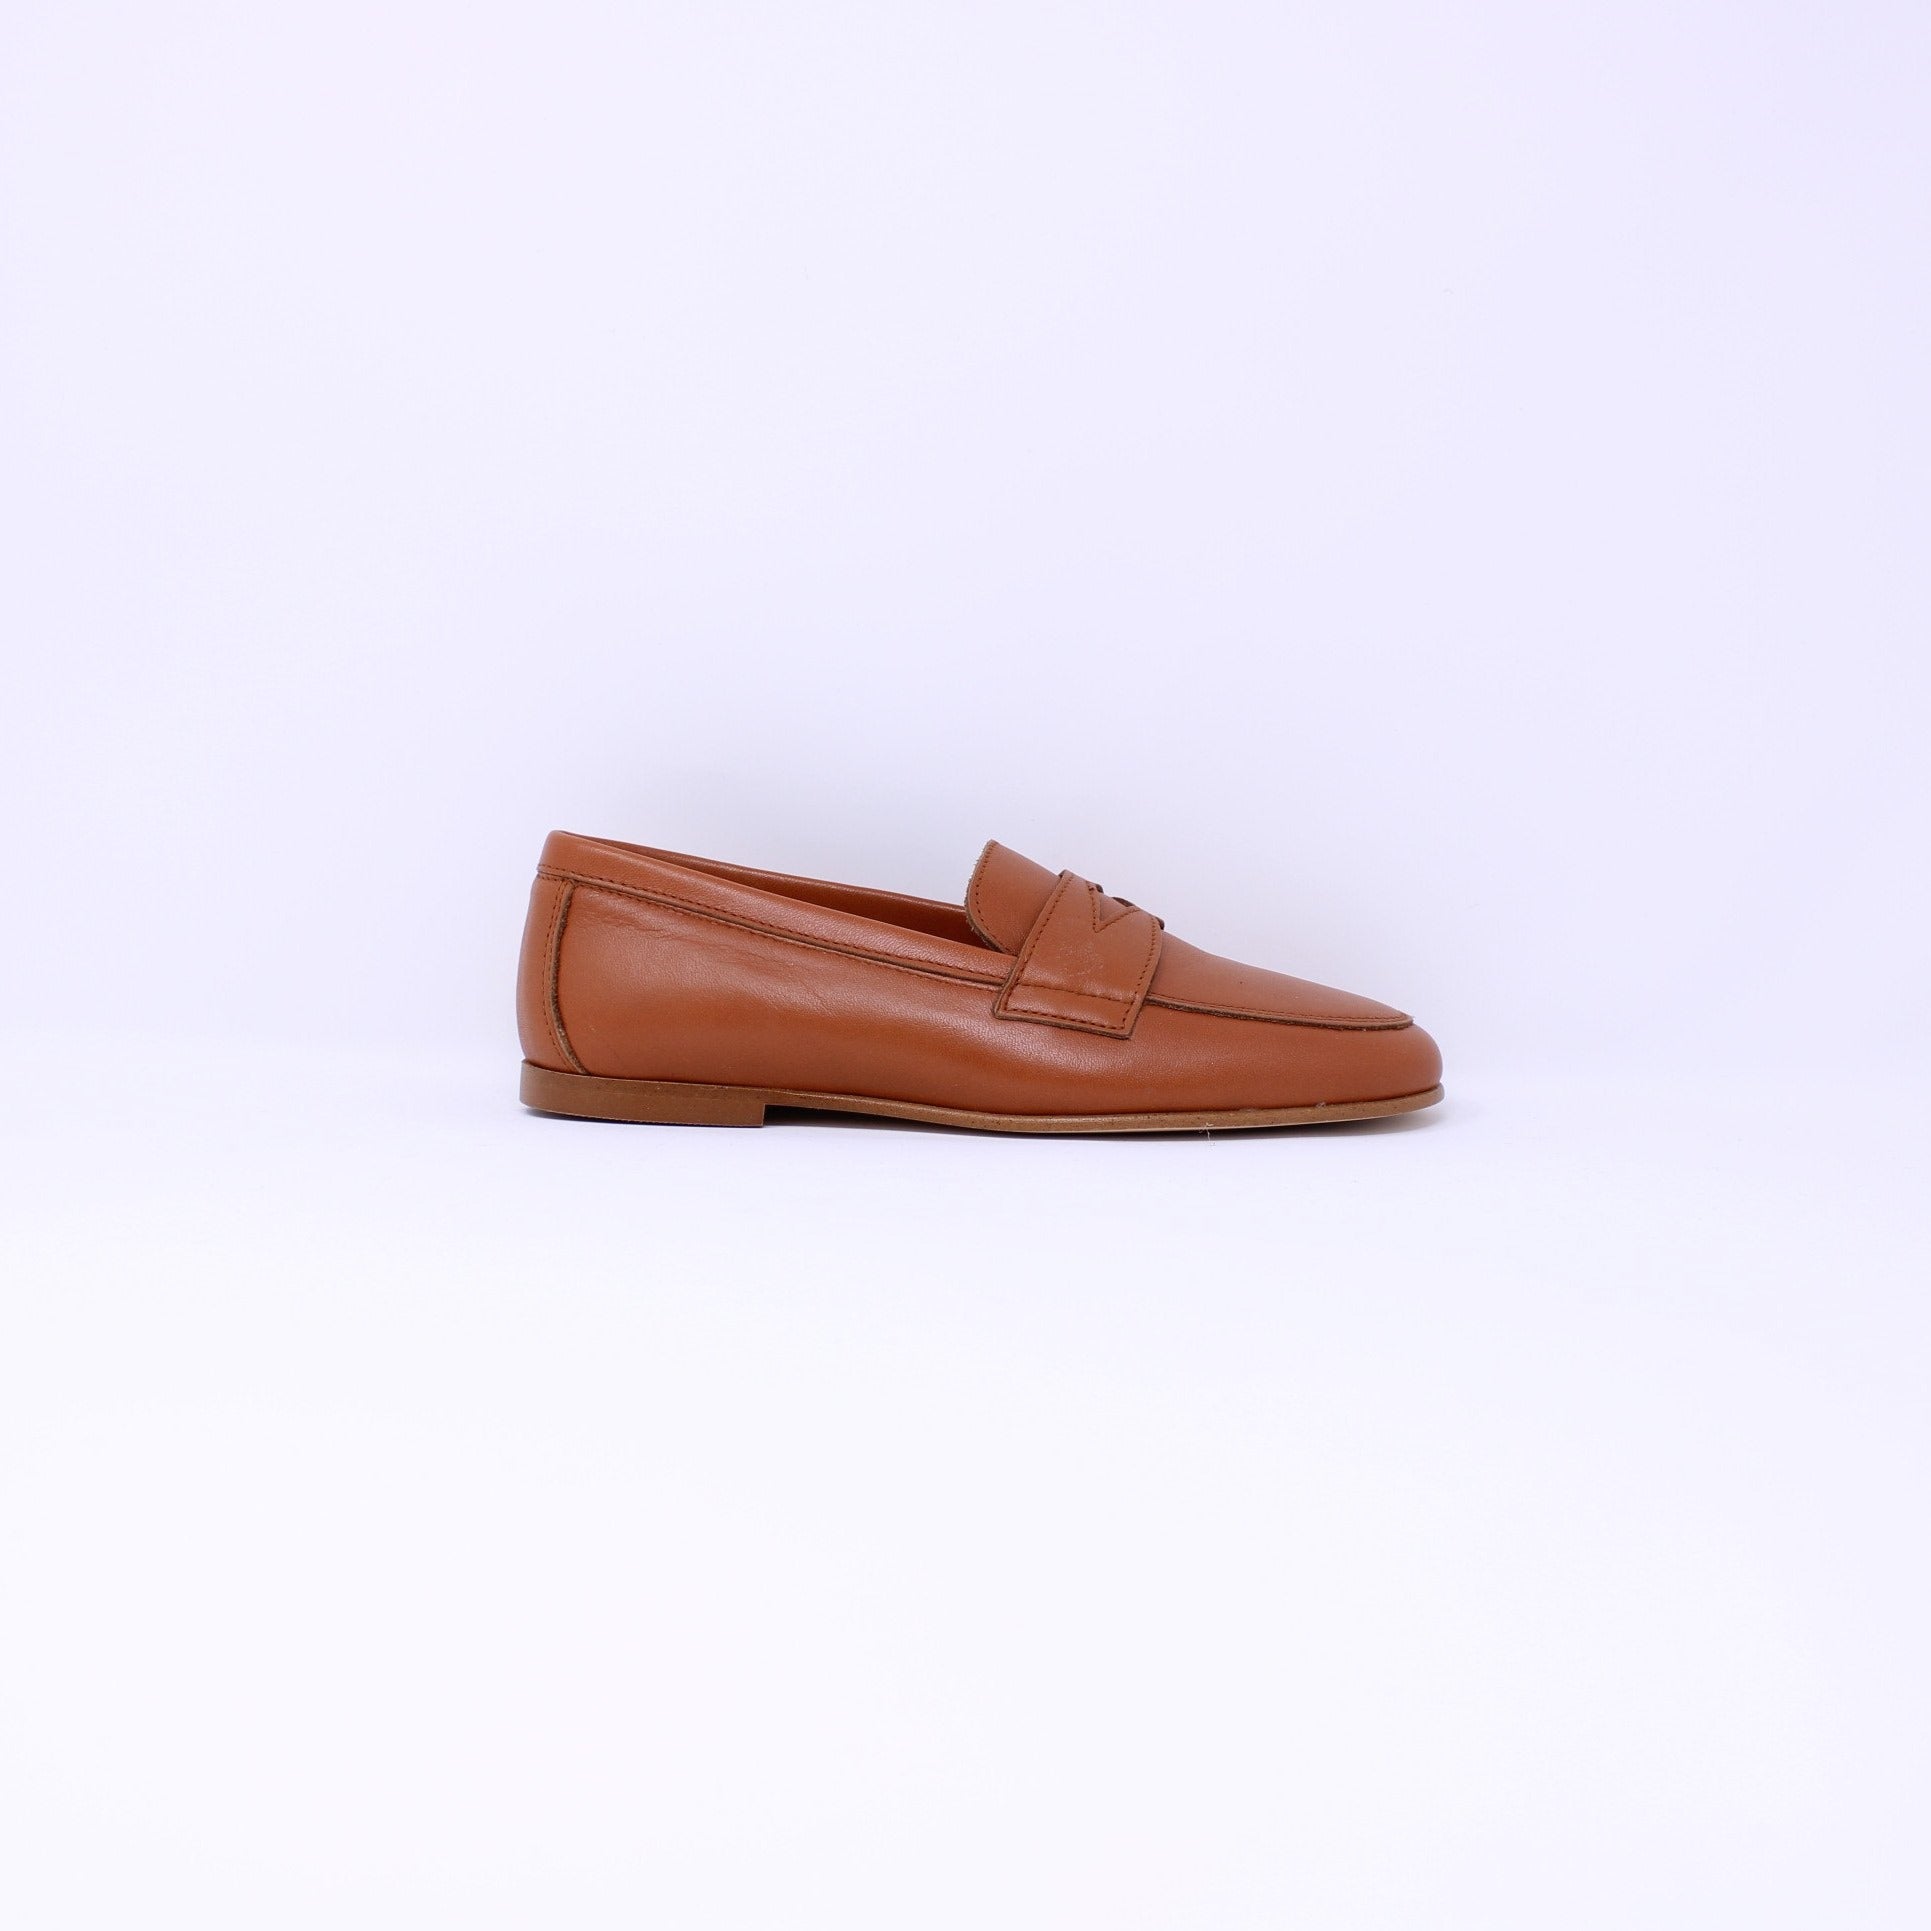 camel leather shoes